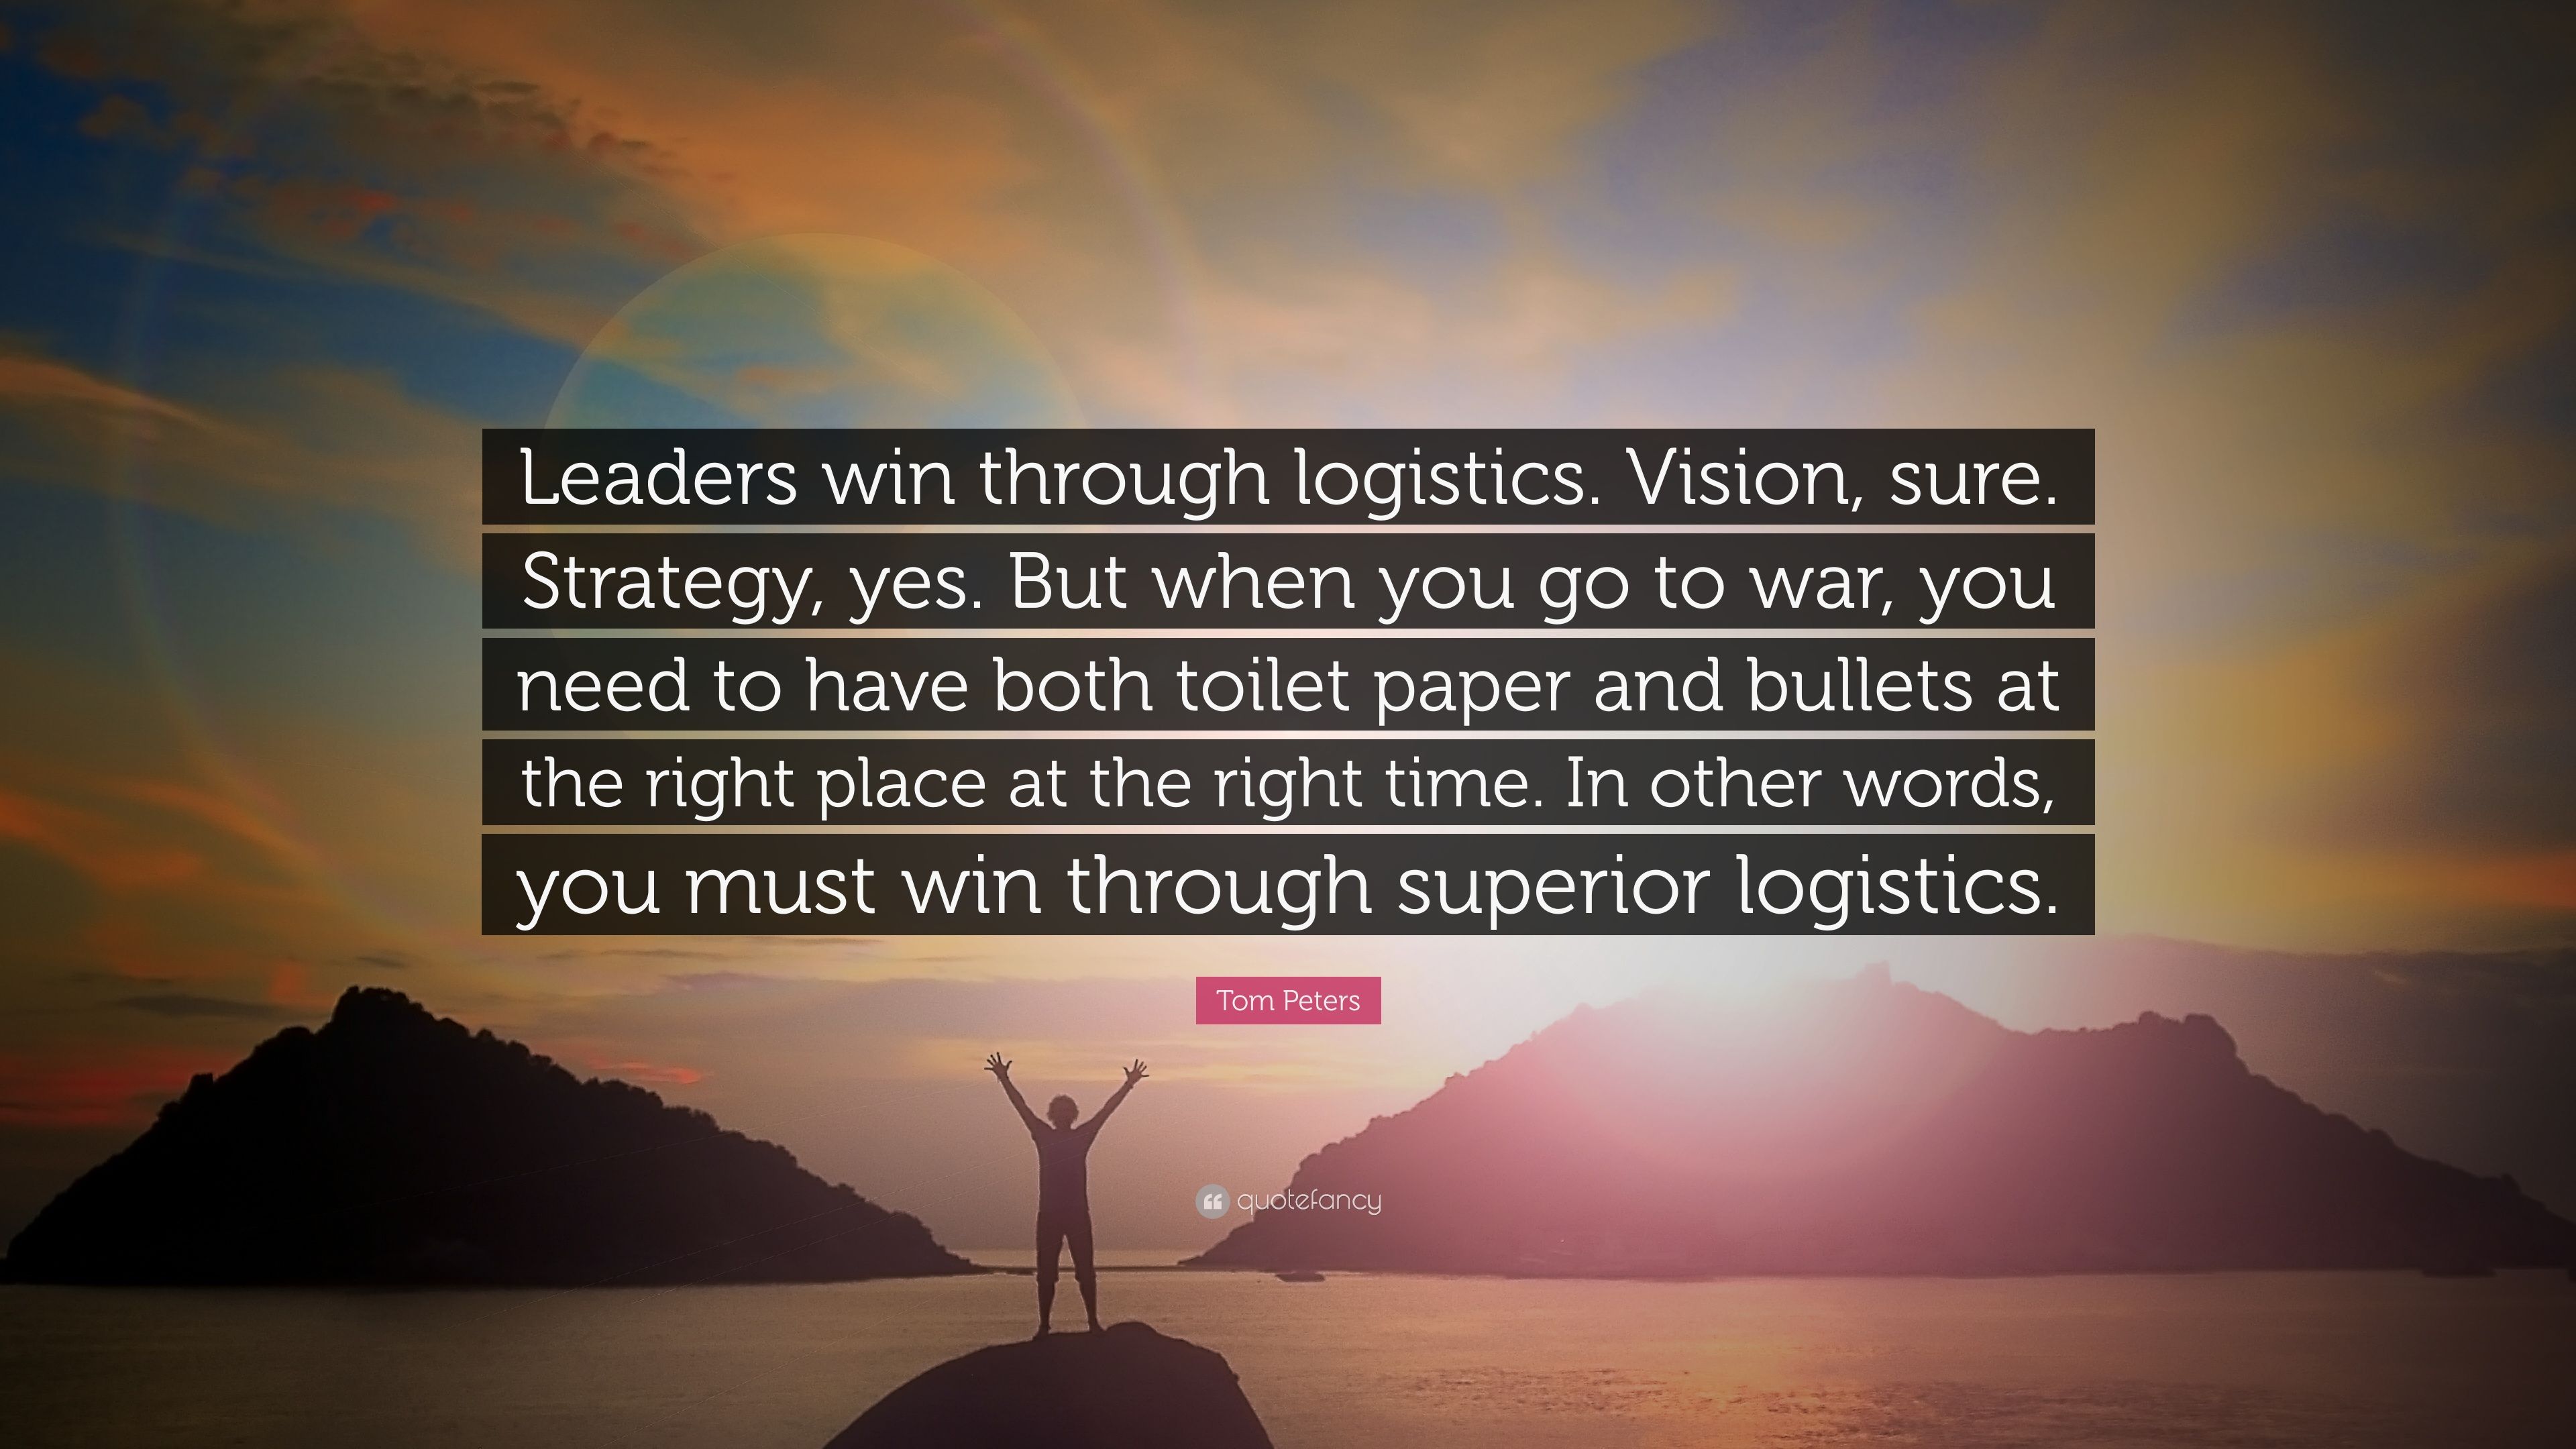 Tom Peters Quote: “Leaders win through logistics. Vision, sure. Strategy, yes. But when you go to war, you need to have both toilet paper a.” (12 wallpaper)